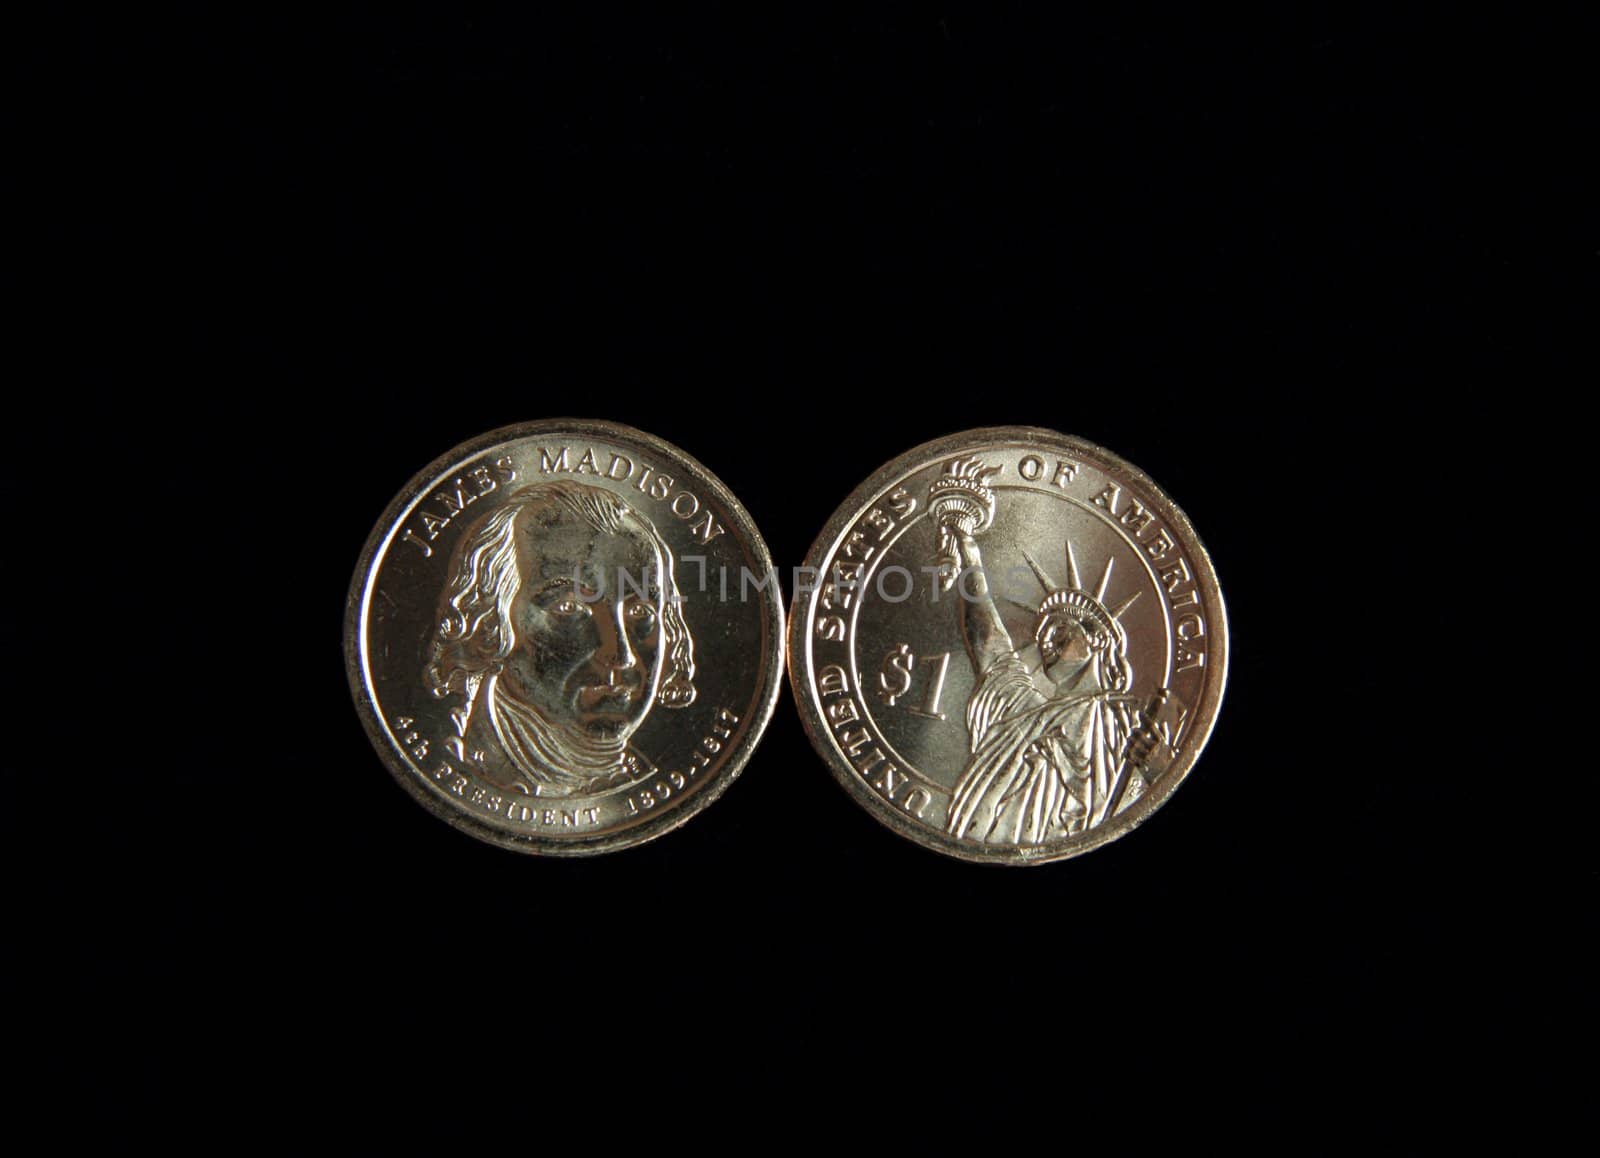 A one dollar James Madison and statue of liberty US coin